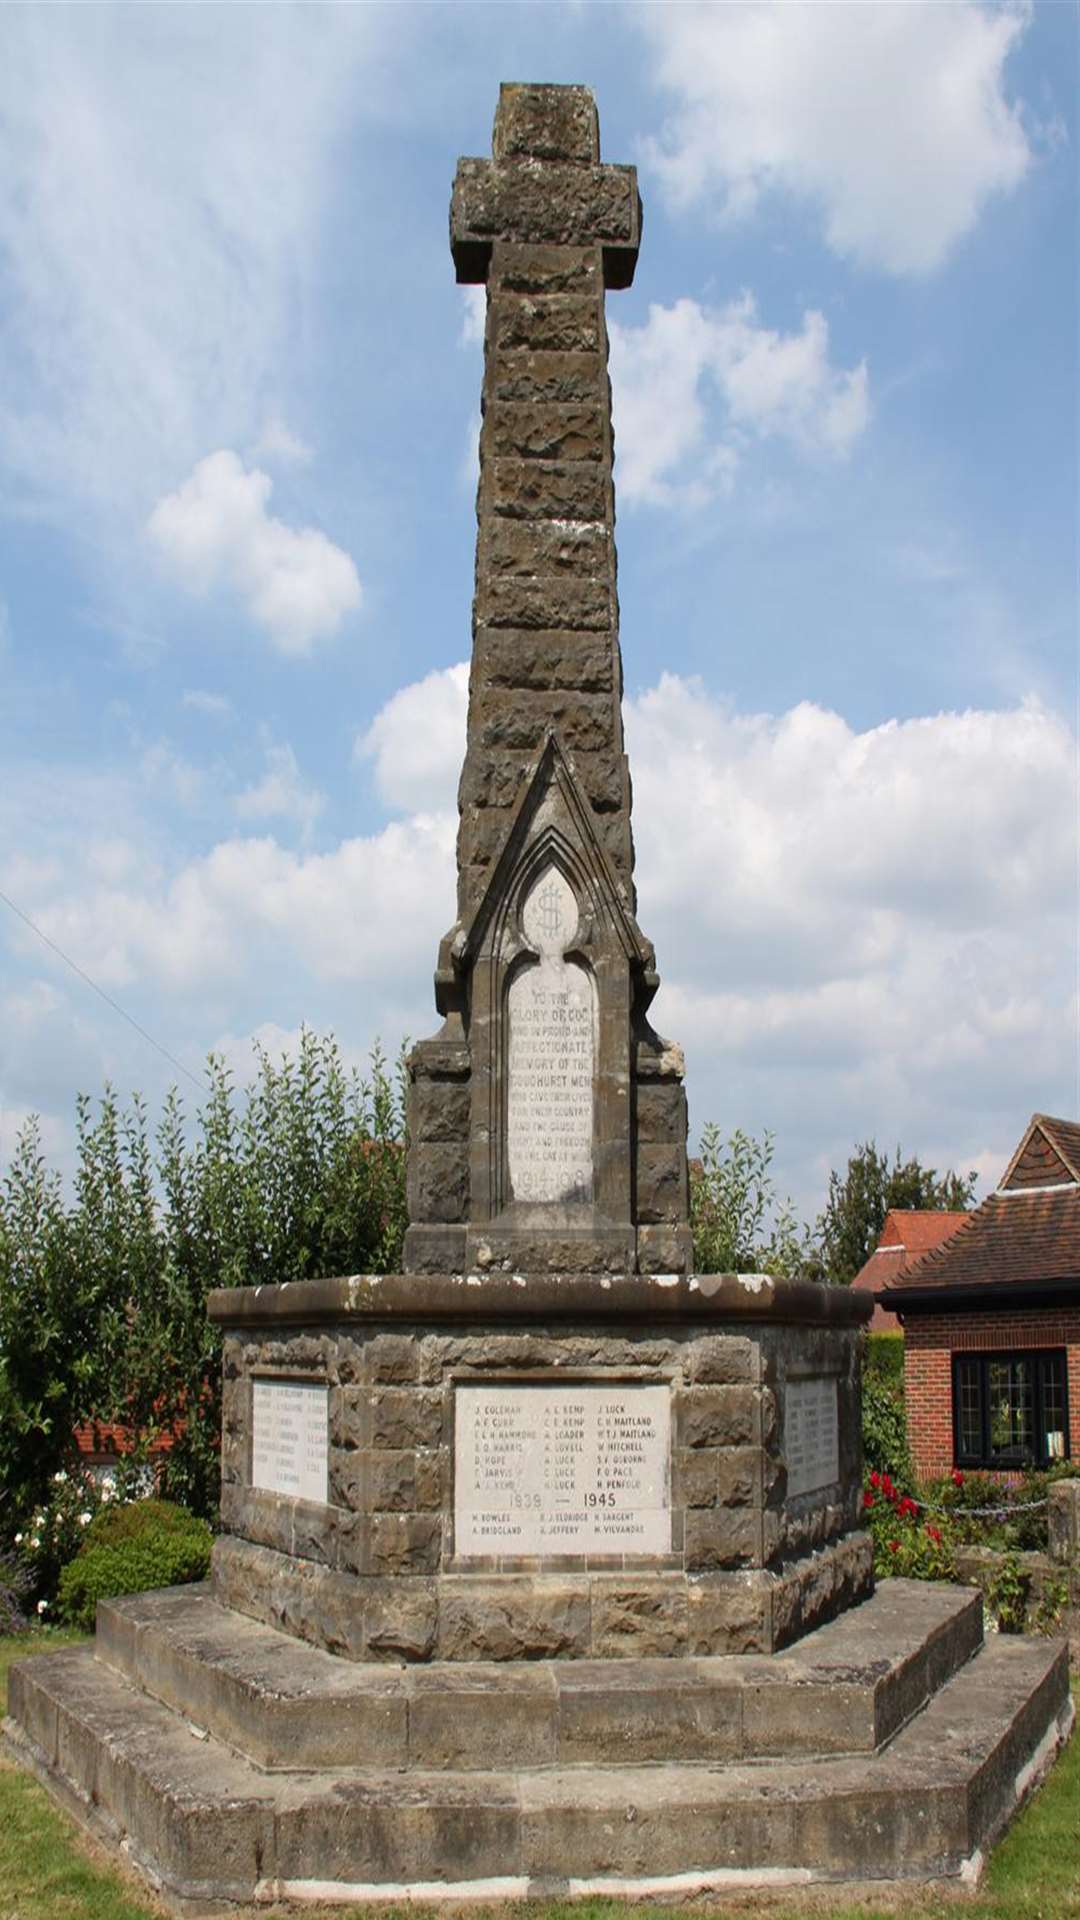 The Memorial as it looked last year